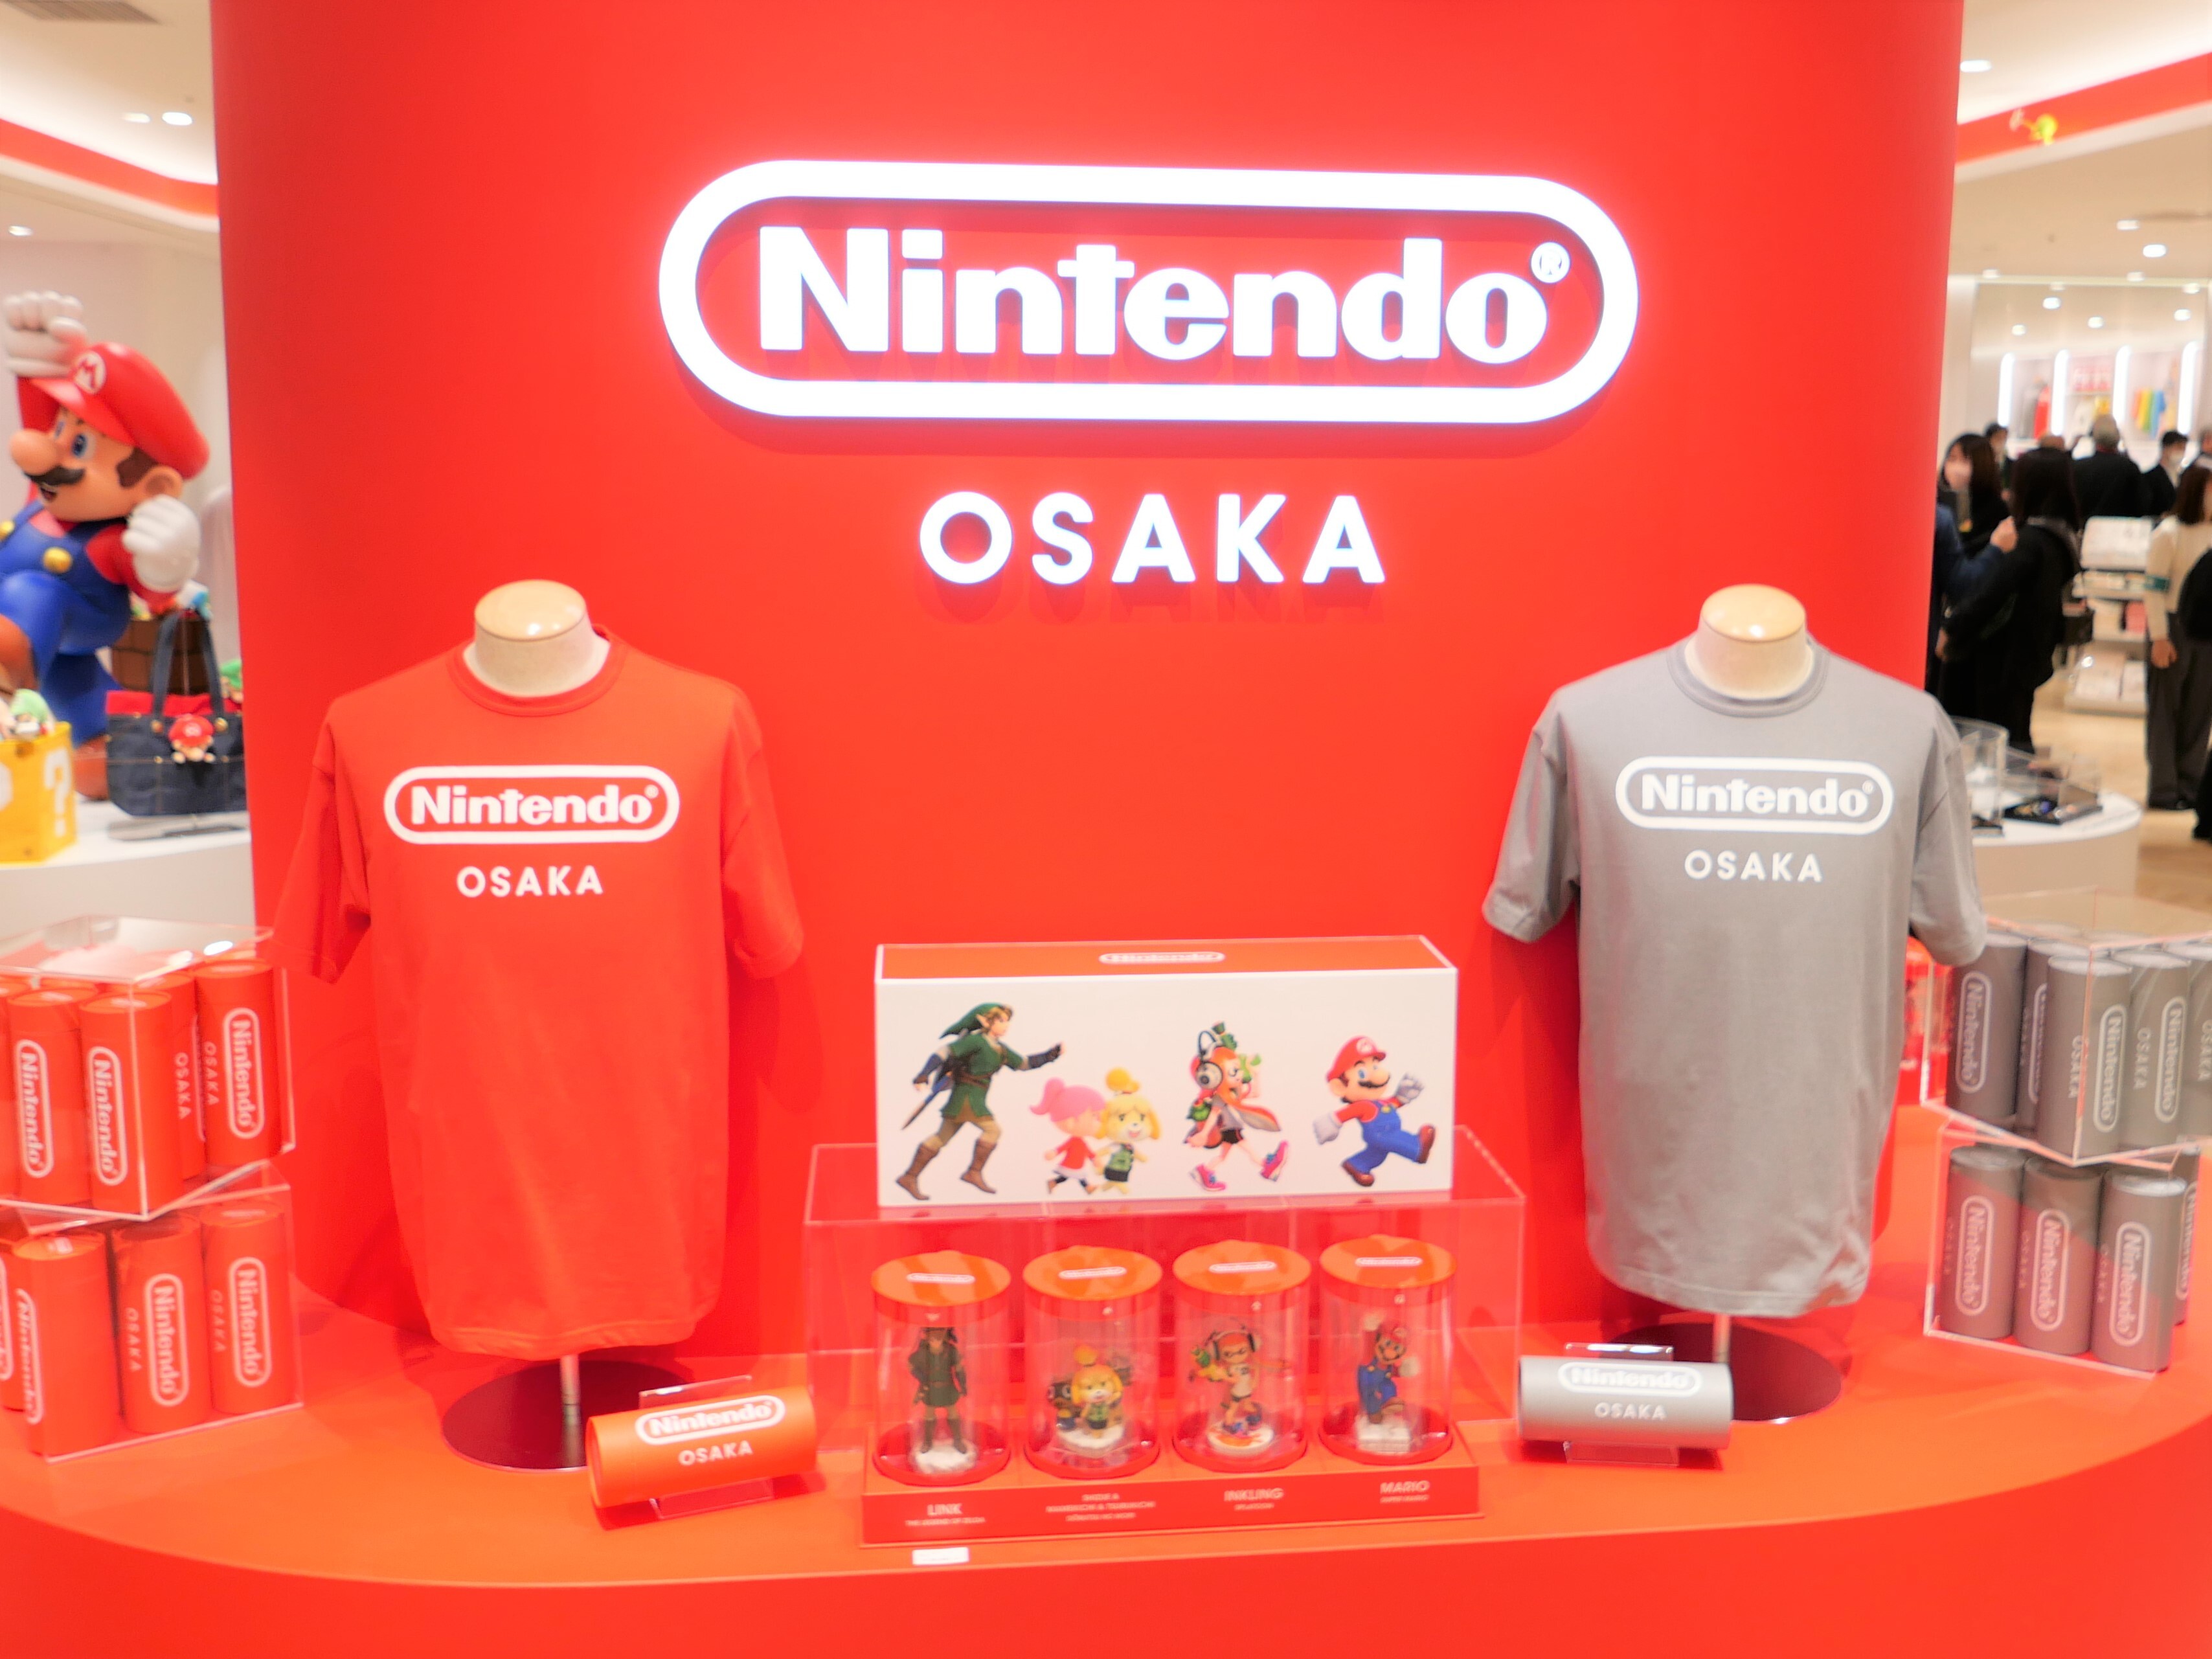 Have too much fun at the Nintendo OSAKA store!